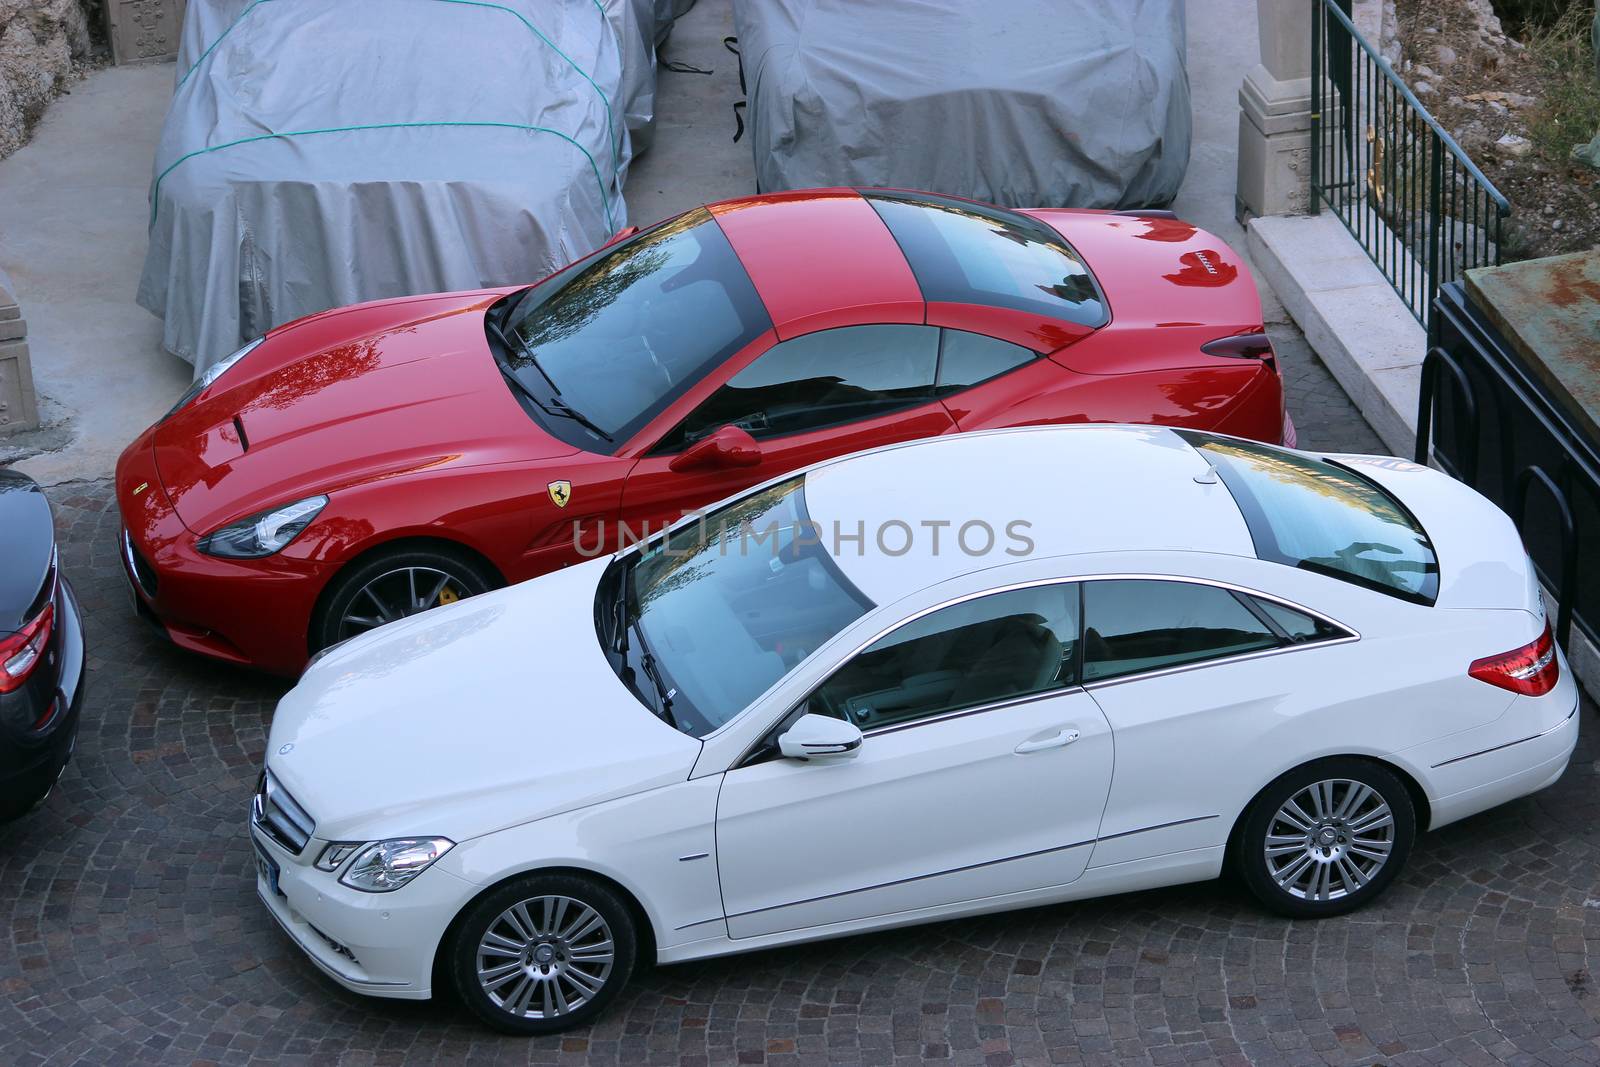 Eze, France - August 30, 2015: Luxury Cars (Mercedes and Ferrari) Parked in a Parking Lot of a 5 star Hotel in Eze. Commune in the Alpes-Maritimes department in Southeastern France